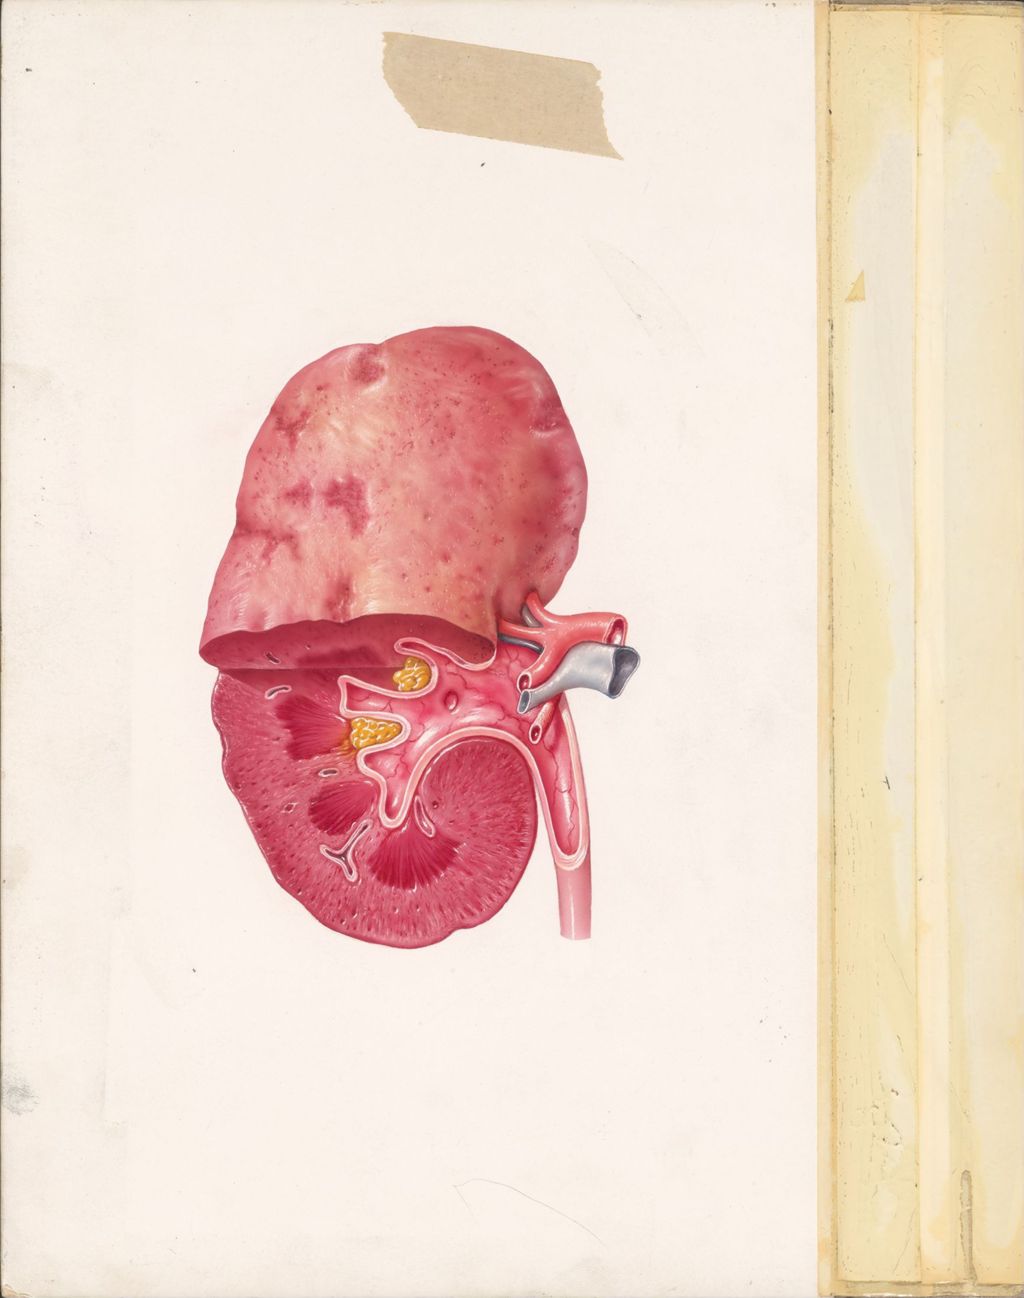 Hypertension and the kidney, Diuril, Gross view of pyelonephritis